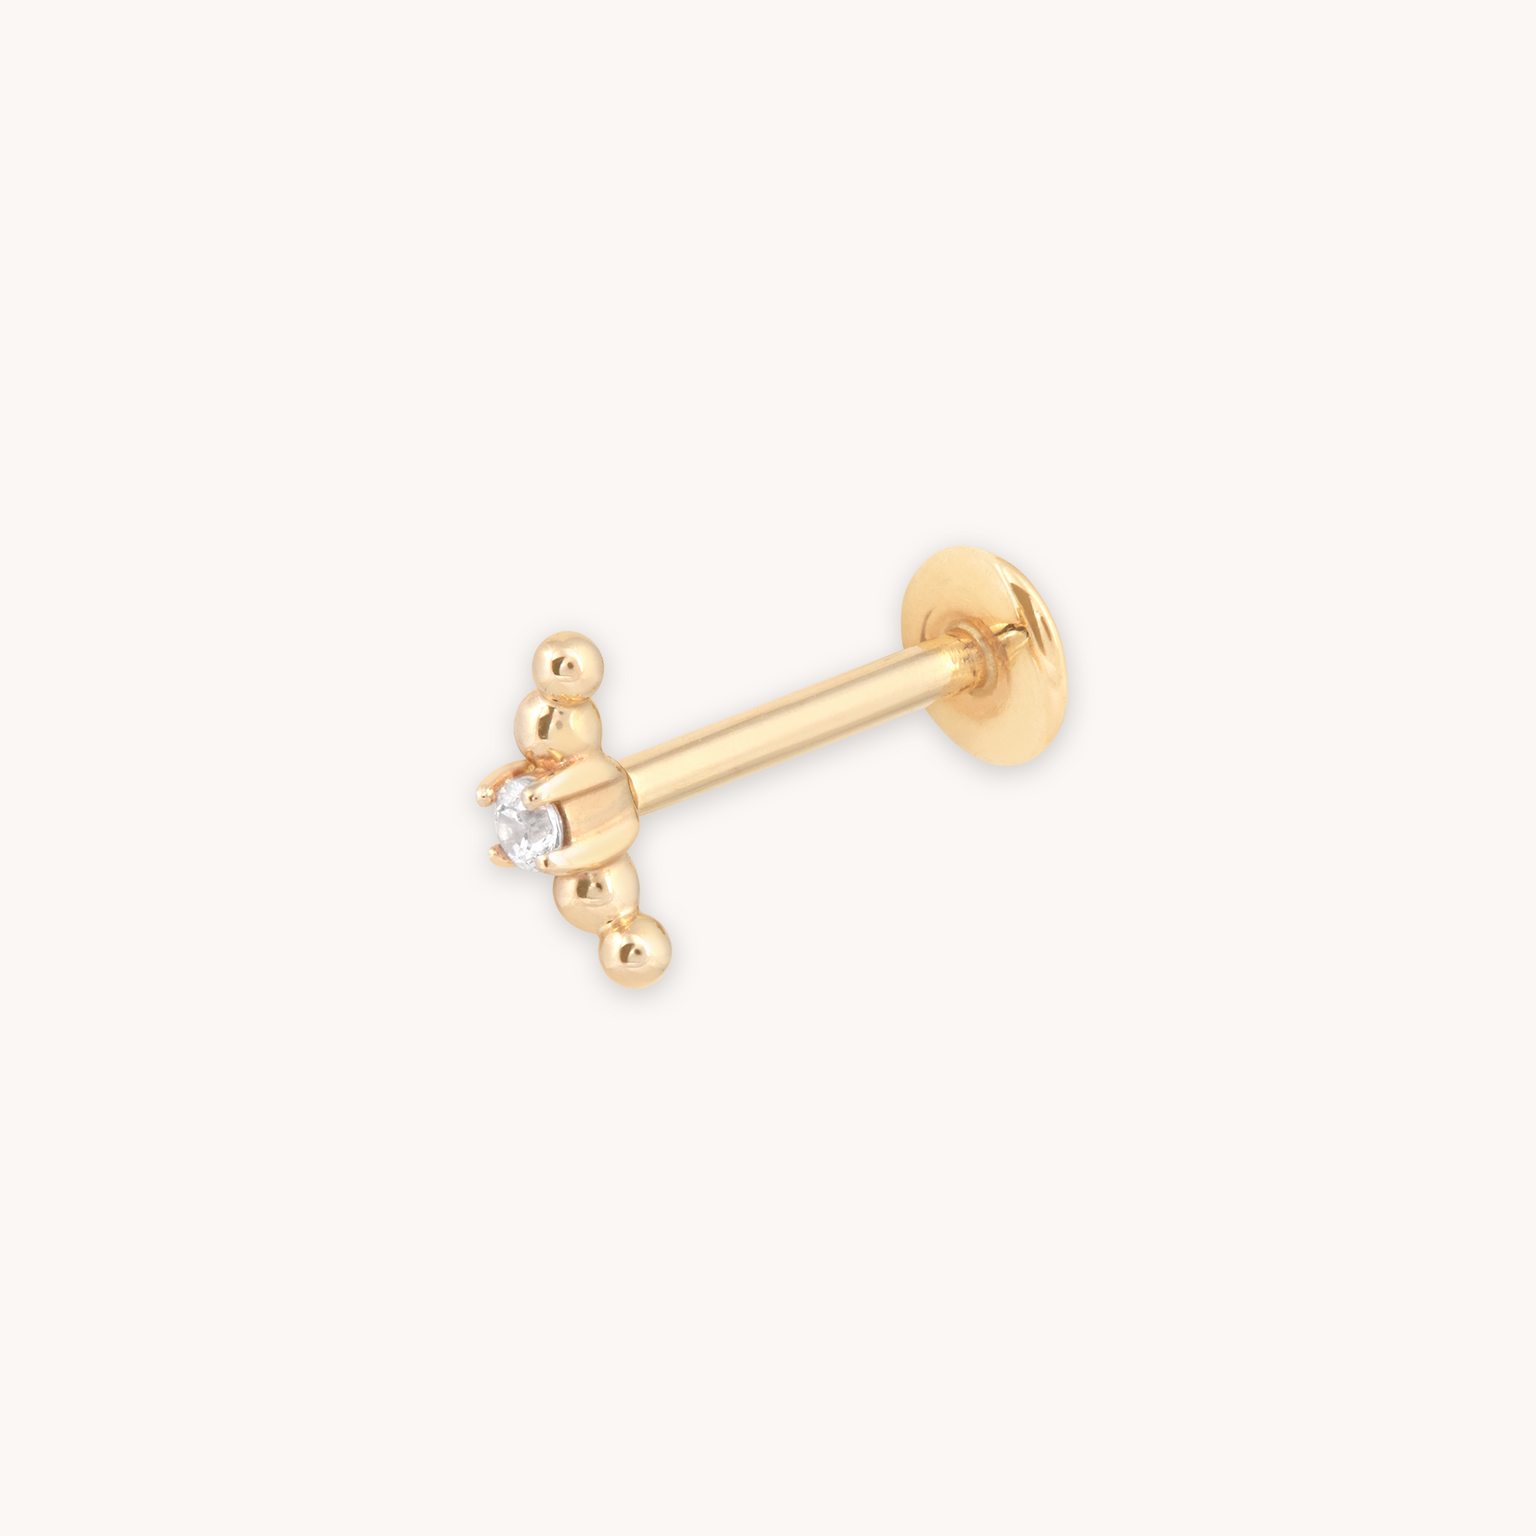 BEADED CURVED PIERCING STUD IN SOLID GOLD CUT OUT